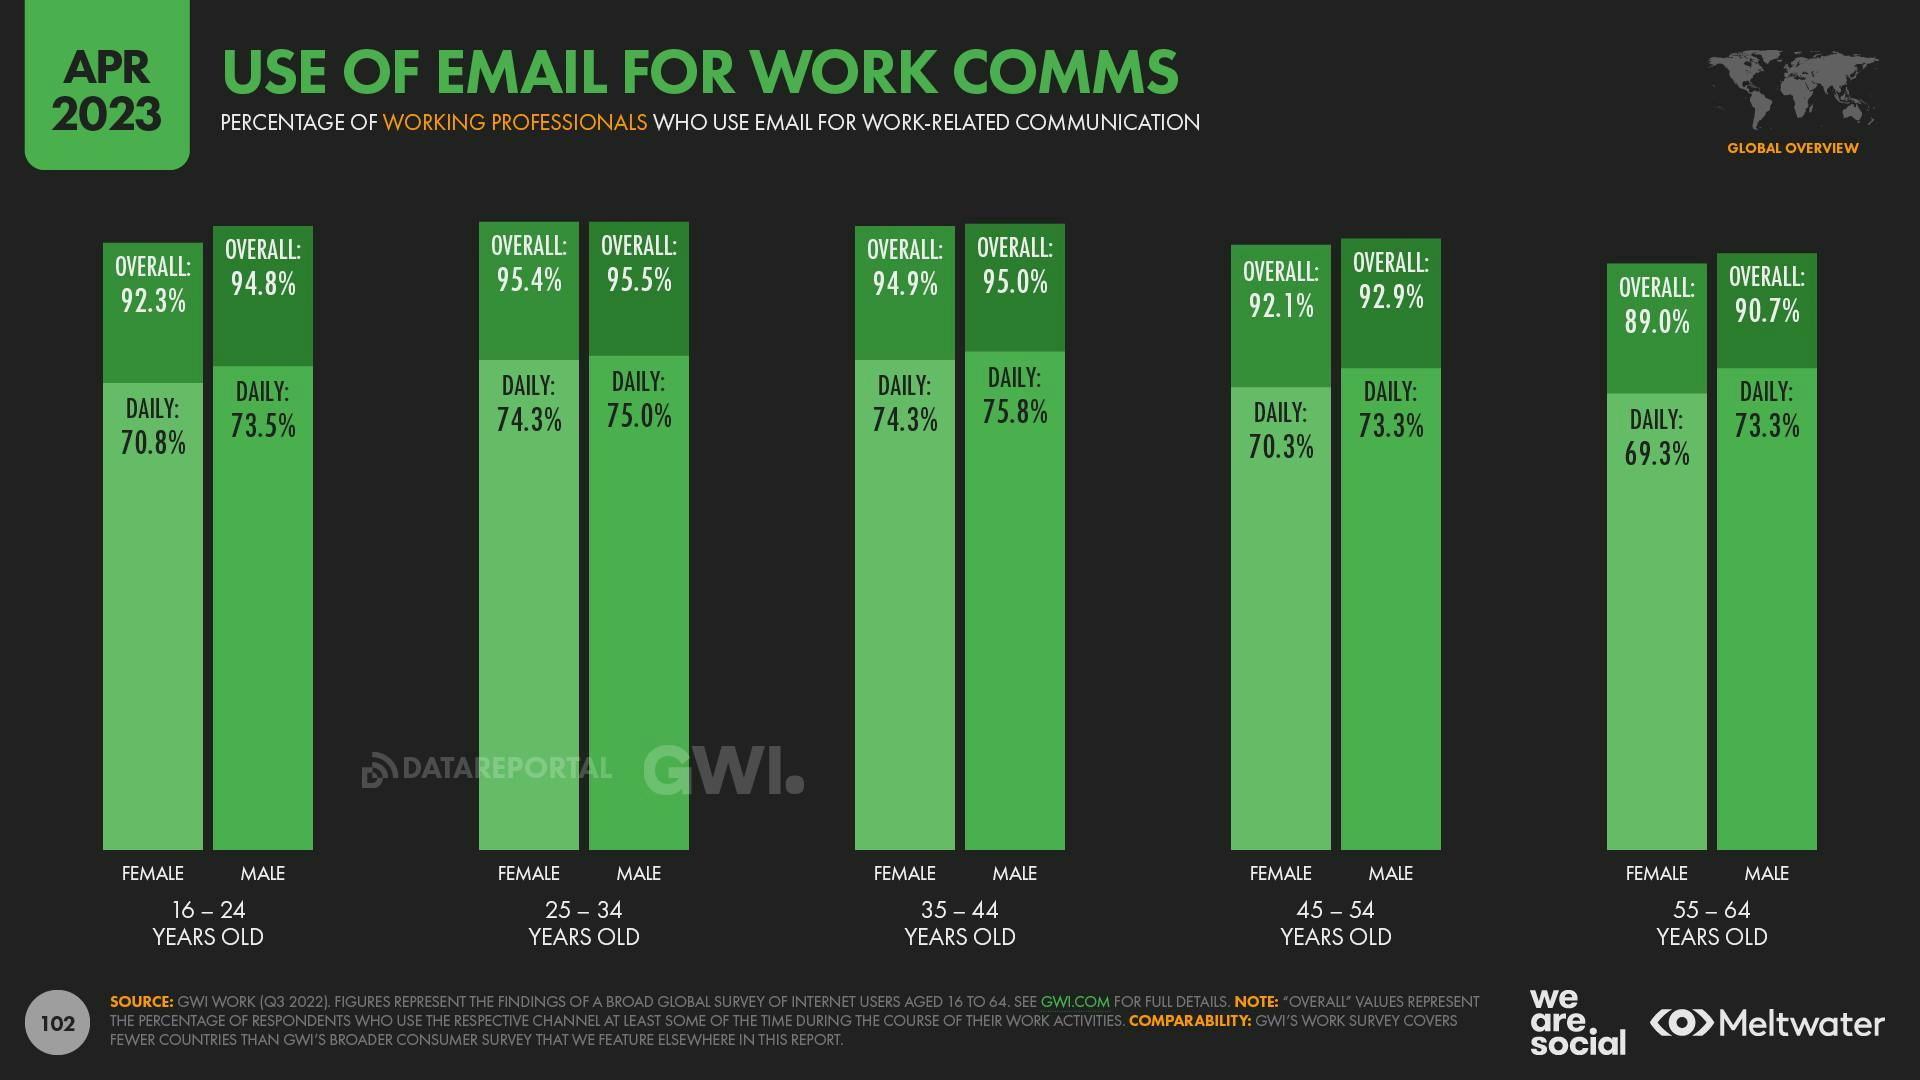 April 2023 Global State of Digital Report: Use of Email for Work Comms